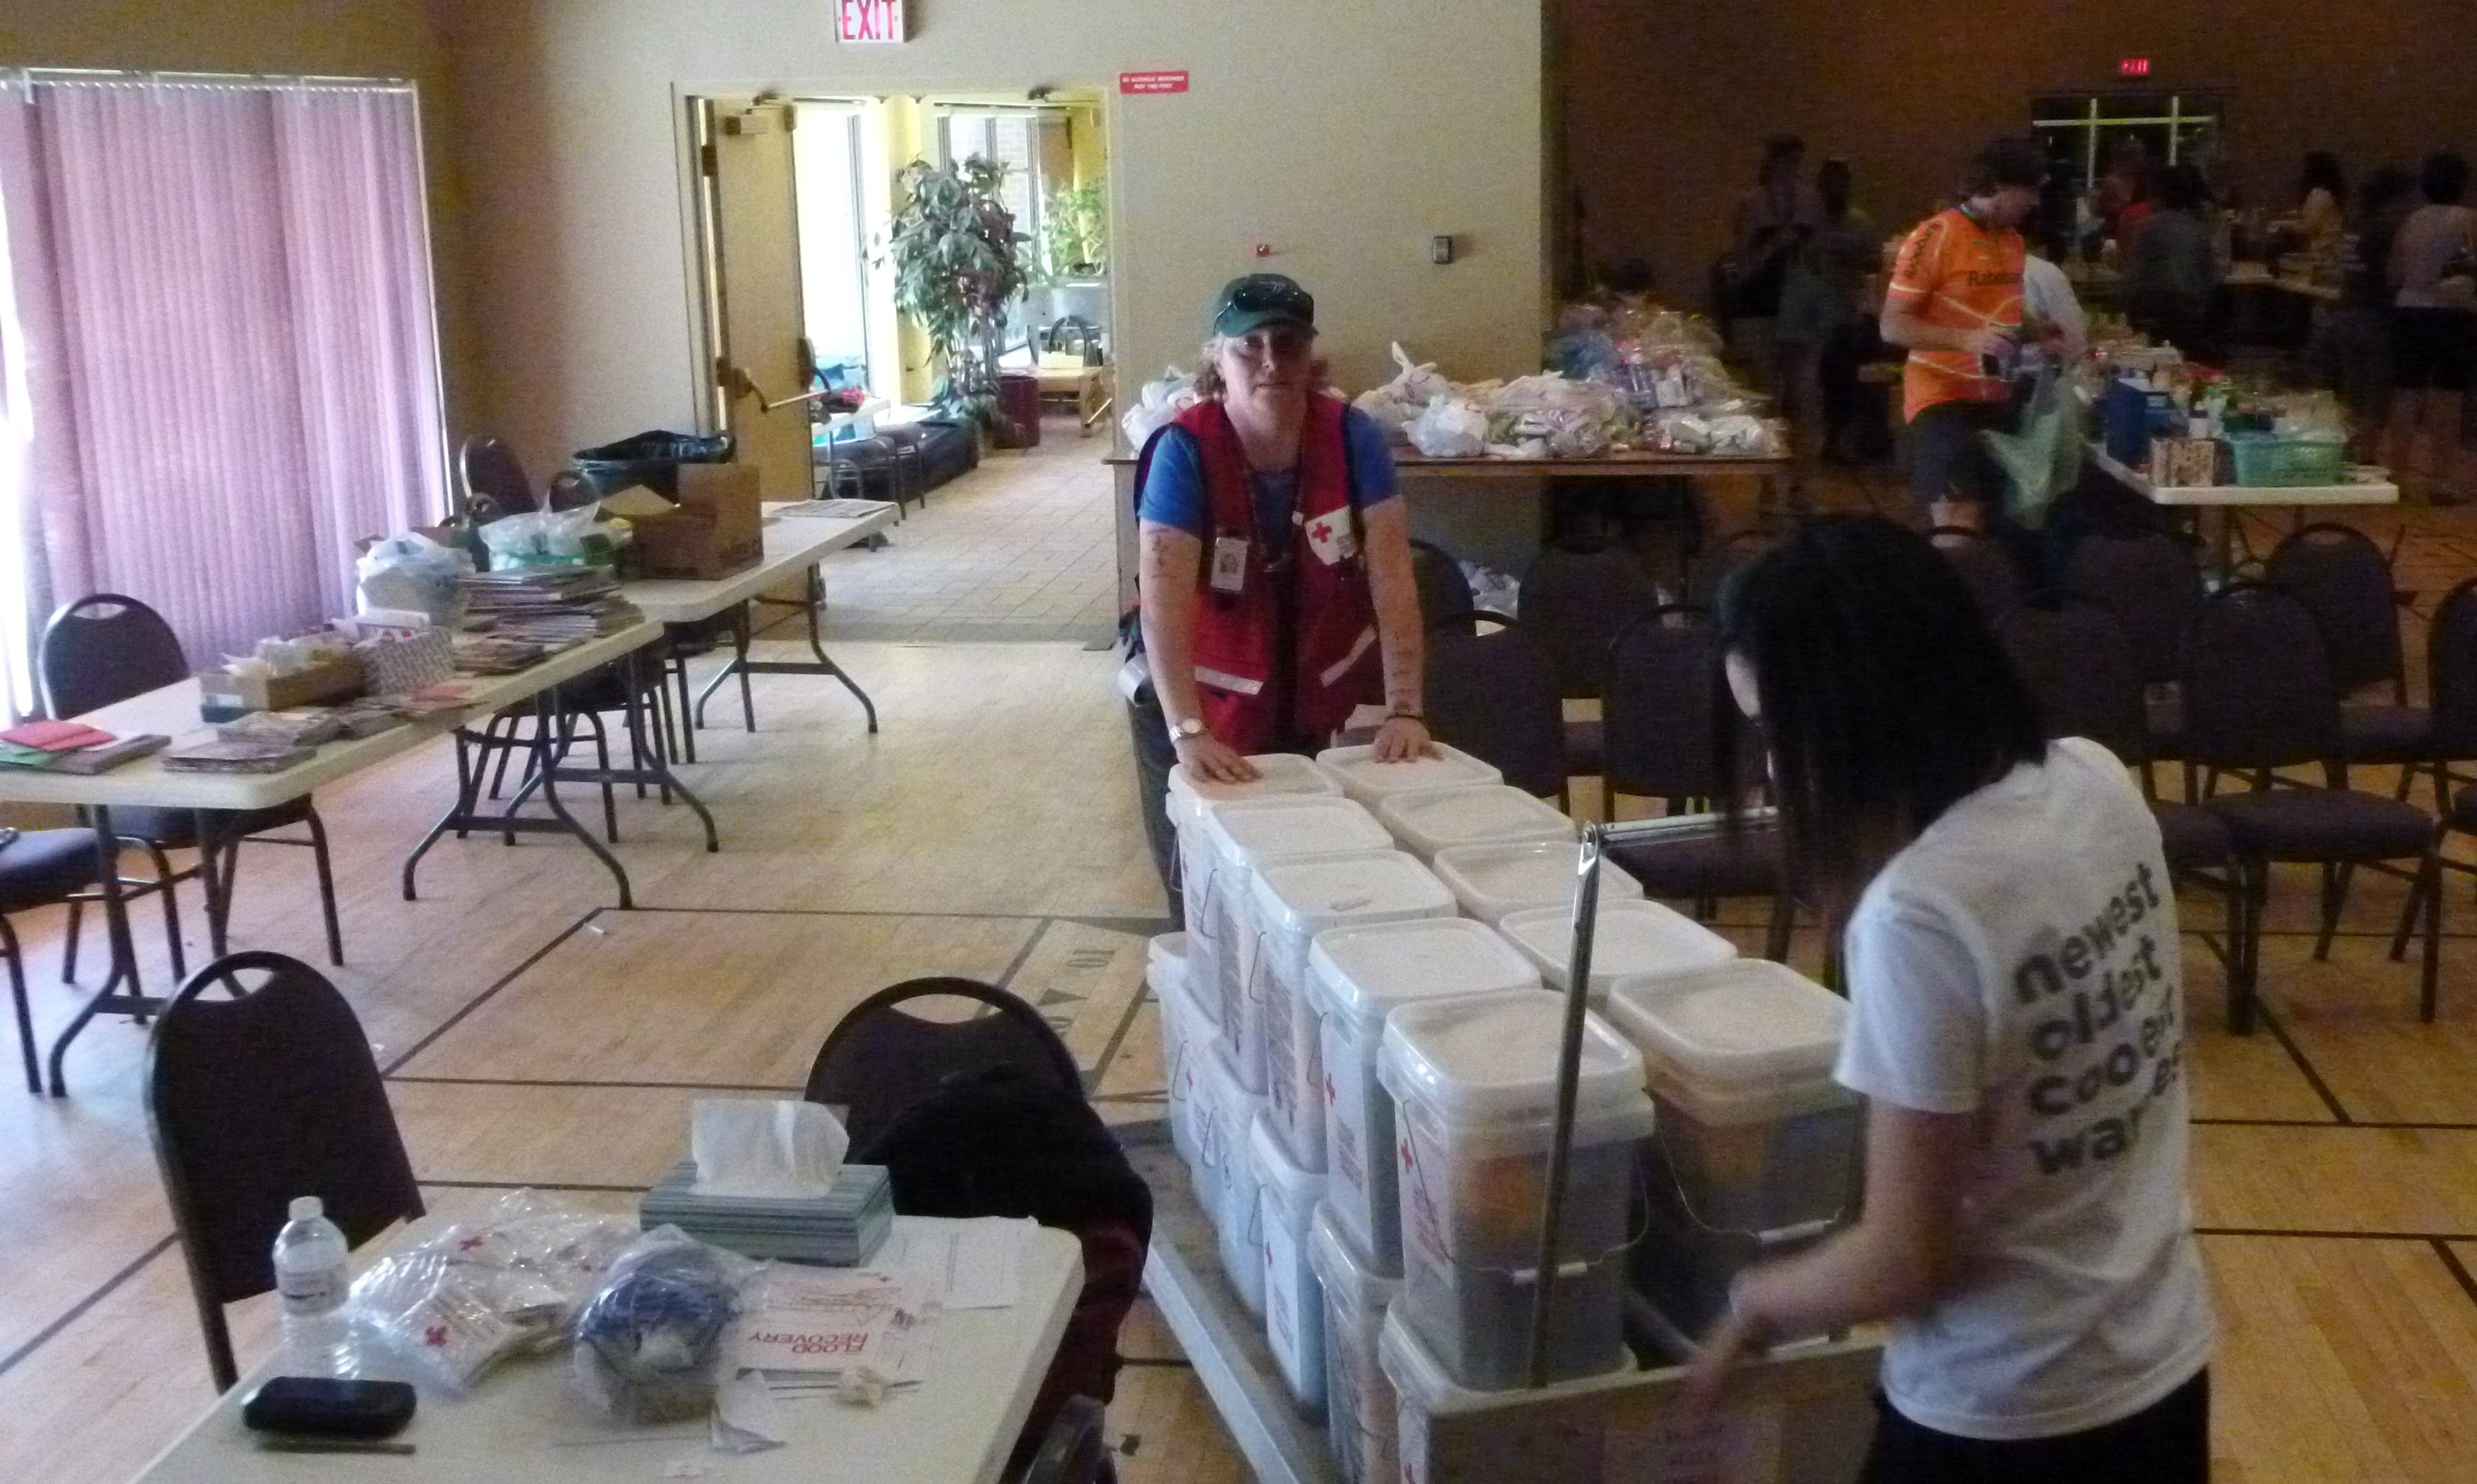 Red Cross assisting with clean-up kits